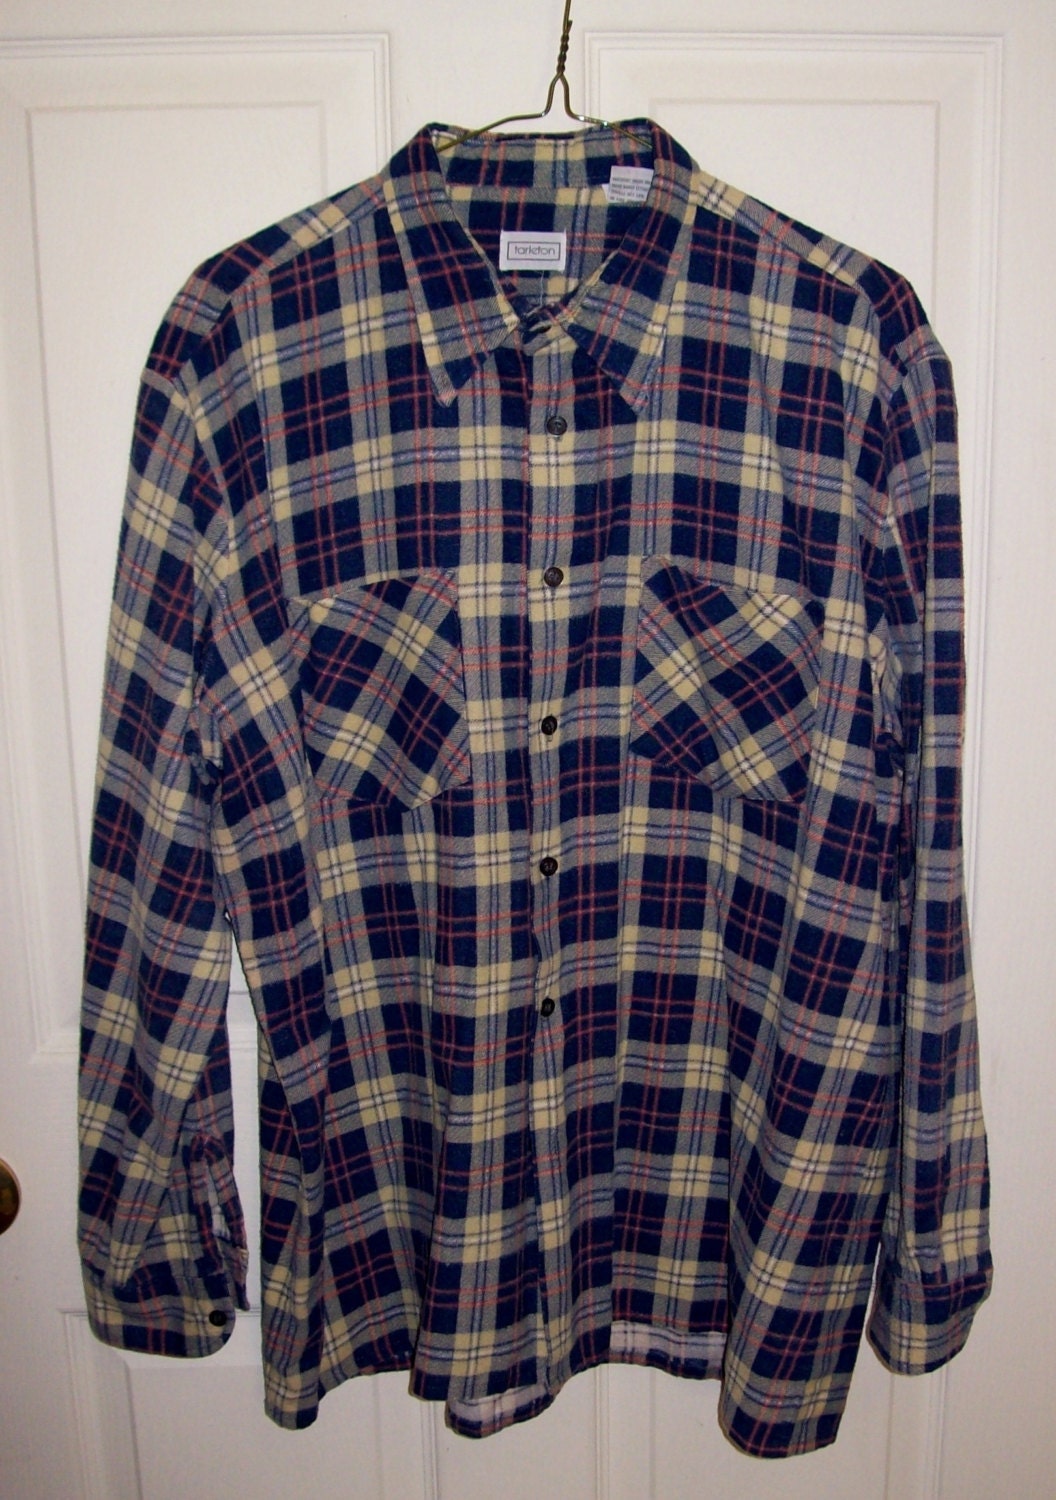 Vintage Men's 1960s Plaid Flannel Shirt by by SusOriginals on Etsy